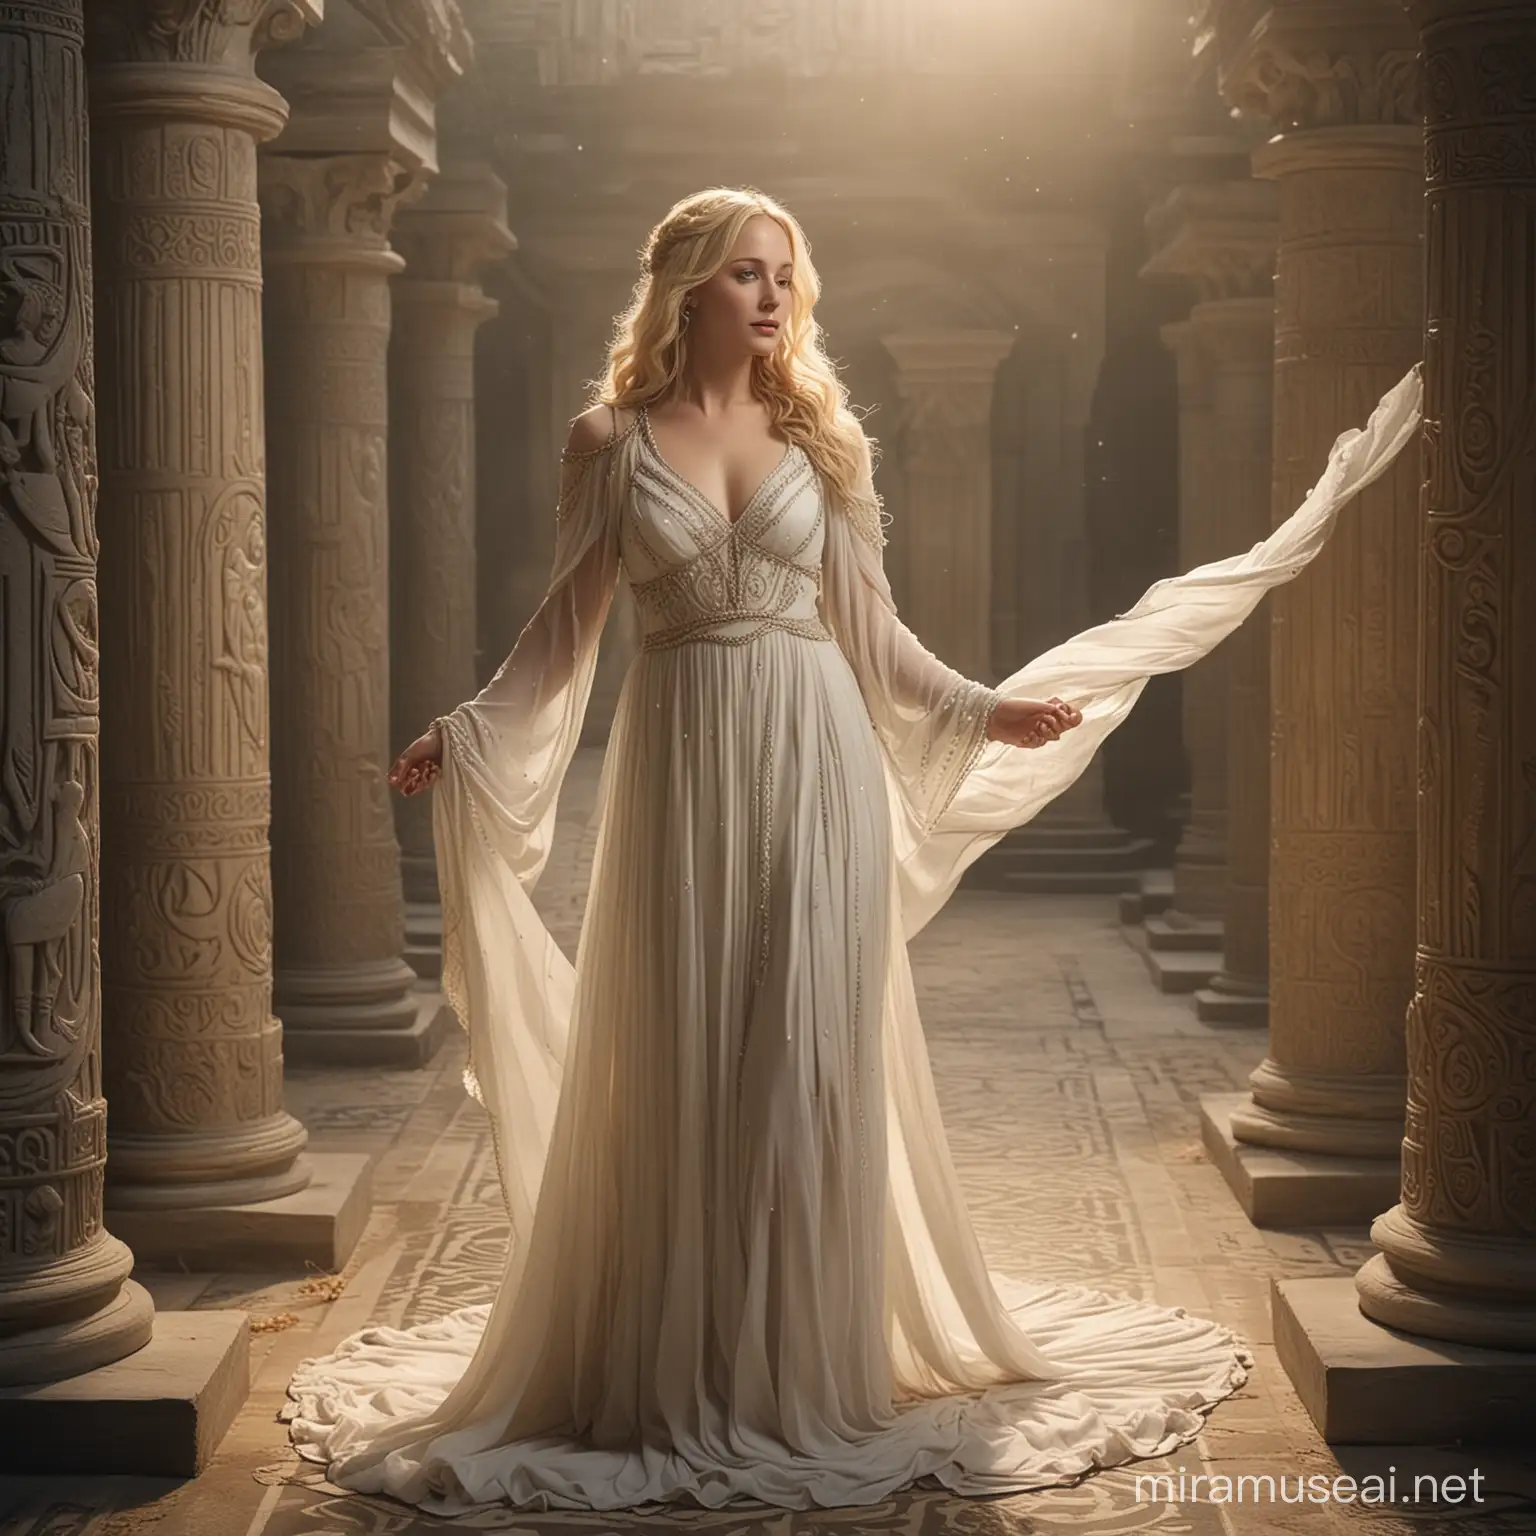 Masterpieced of Candice Accola as Ariadne in an ethereal, dreamlike setting, intricate labyrinth background, flowing Greek dress, ancient Greek mythology, mystical atmosphere, soft and warm lighting, high quality, detailed, ethereal, dreamlike, ancient Greek mythology, flowing dress, intricate details, mystical, soft lighting, atmospheric, professional
